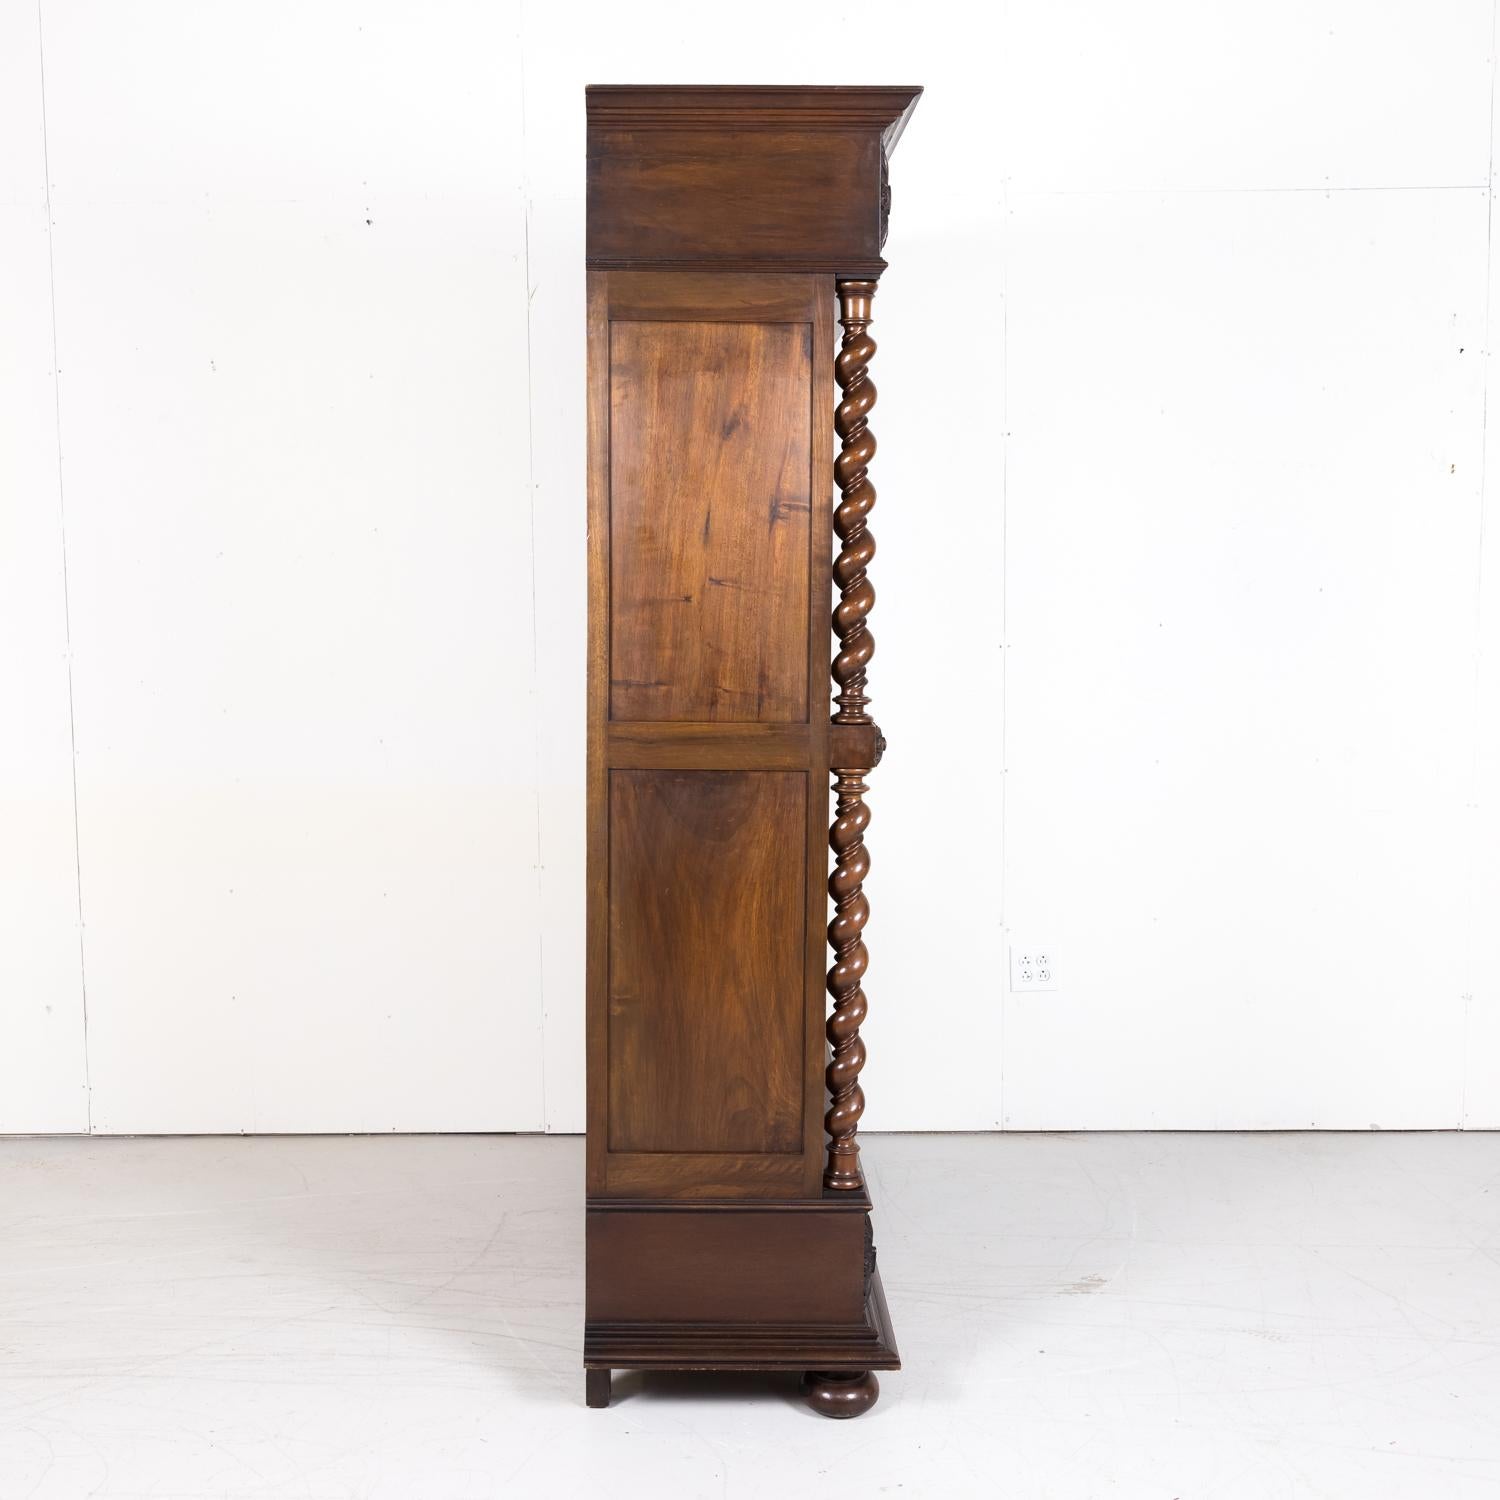 19th Century French Louis XIII Style Barley Twist Bibliotheque or Bookcase 10